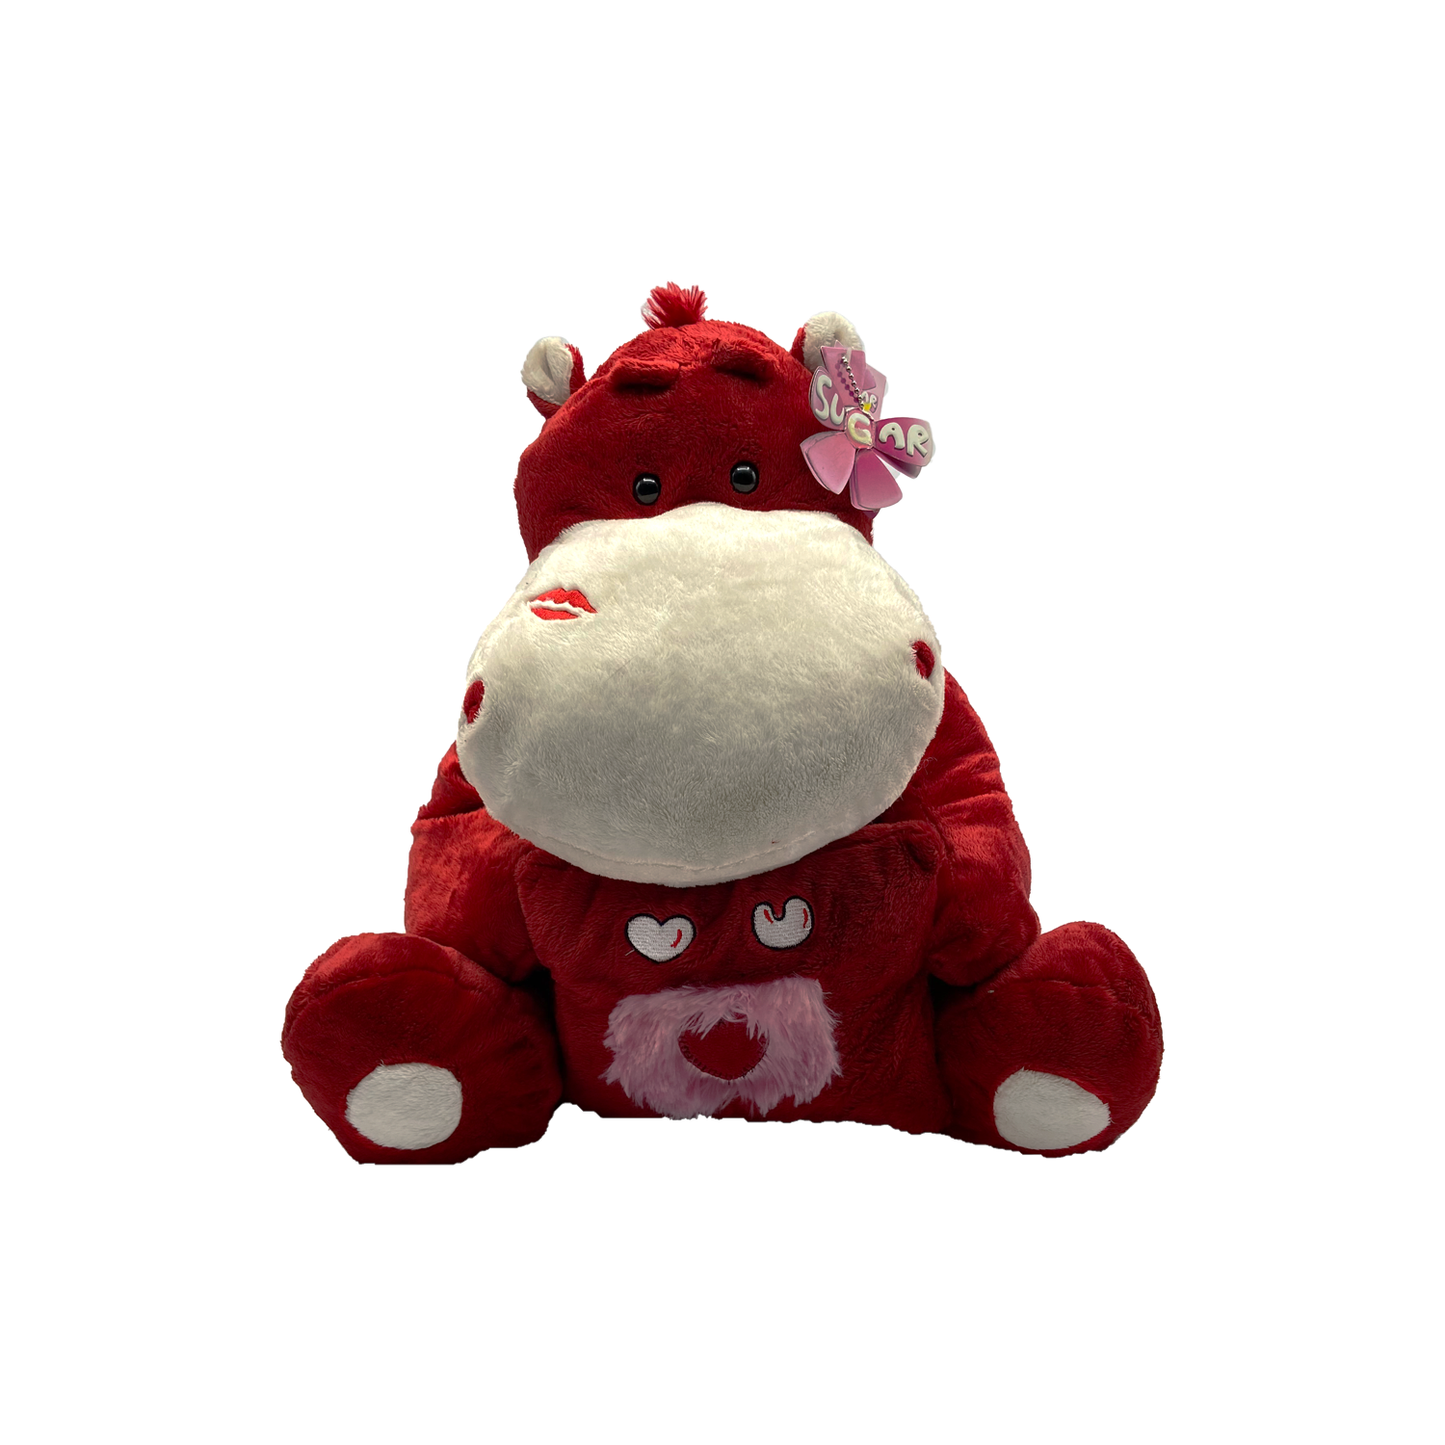 Cuddly Plush Red Cow